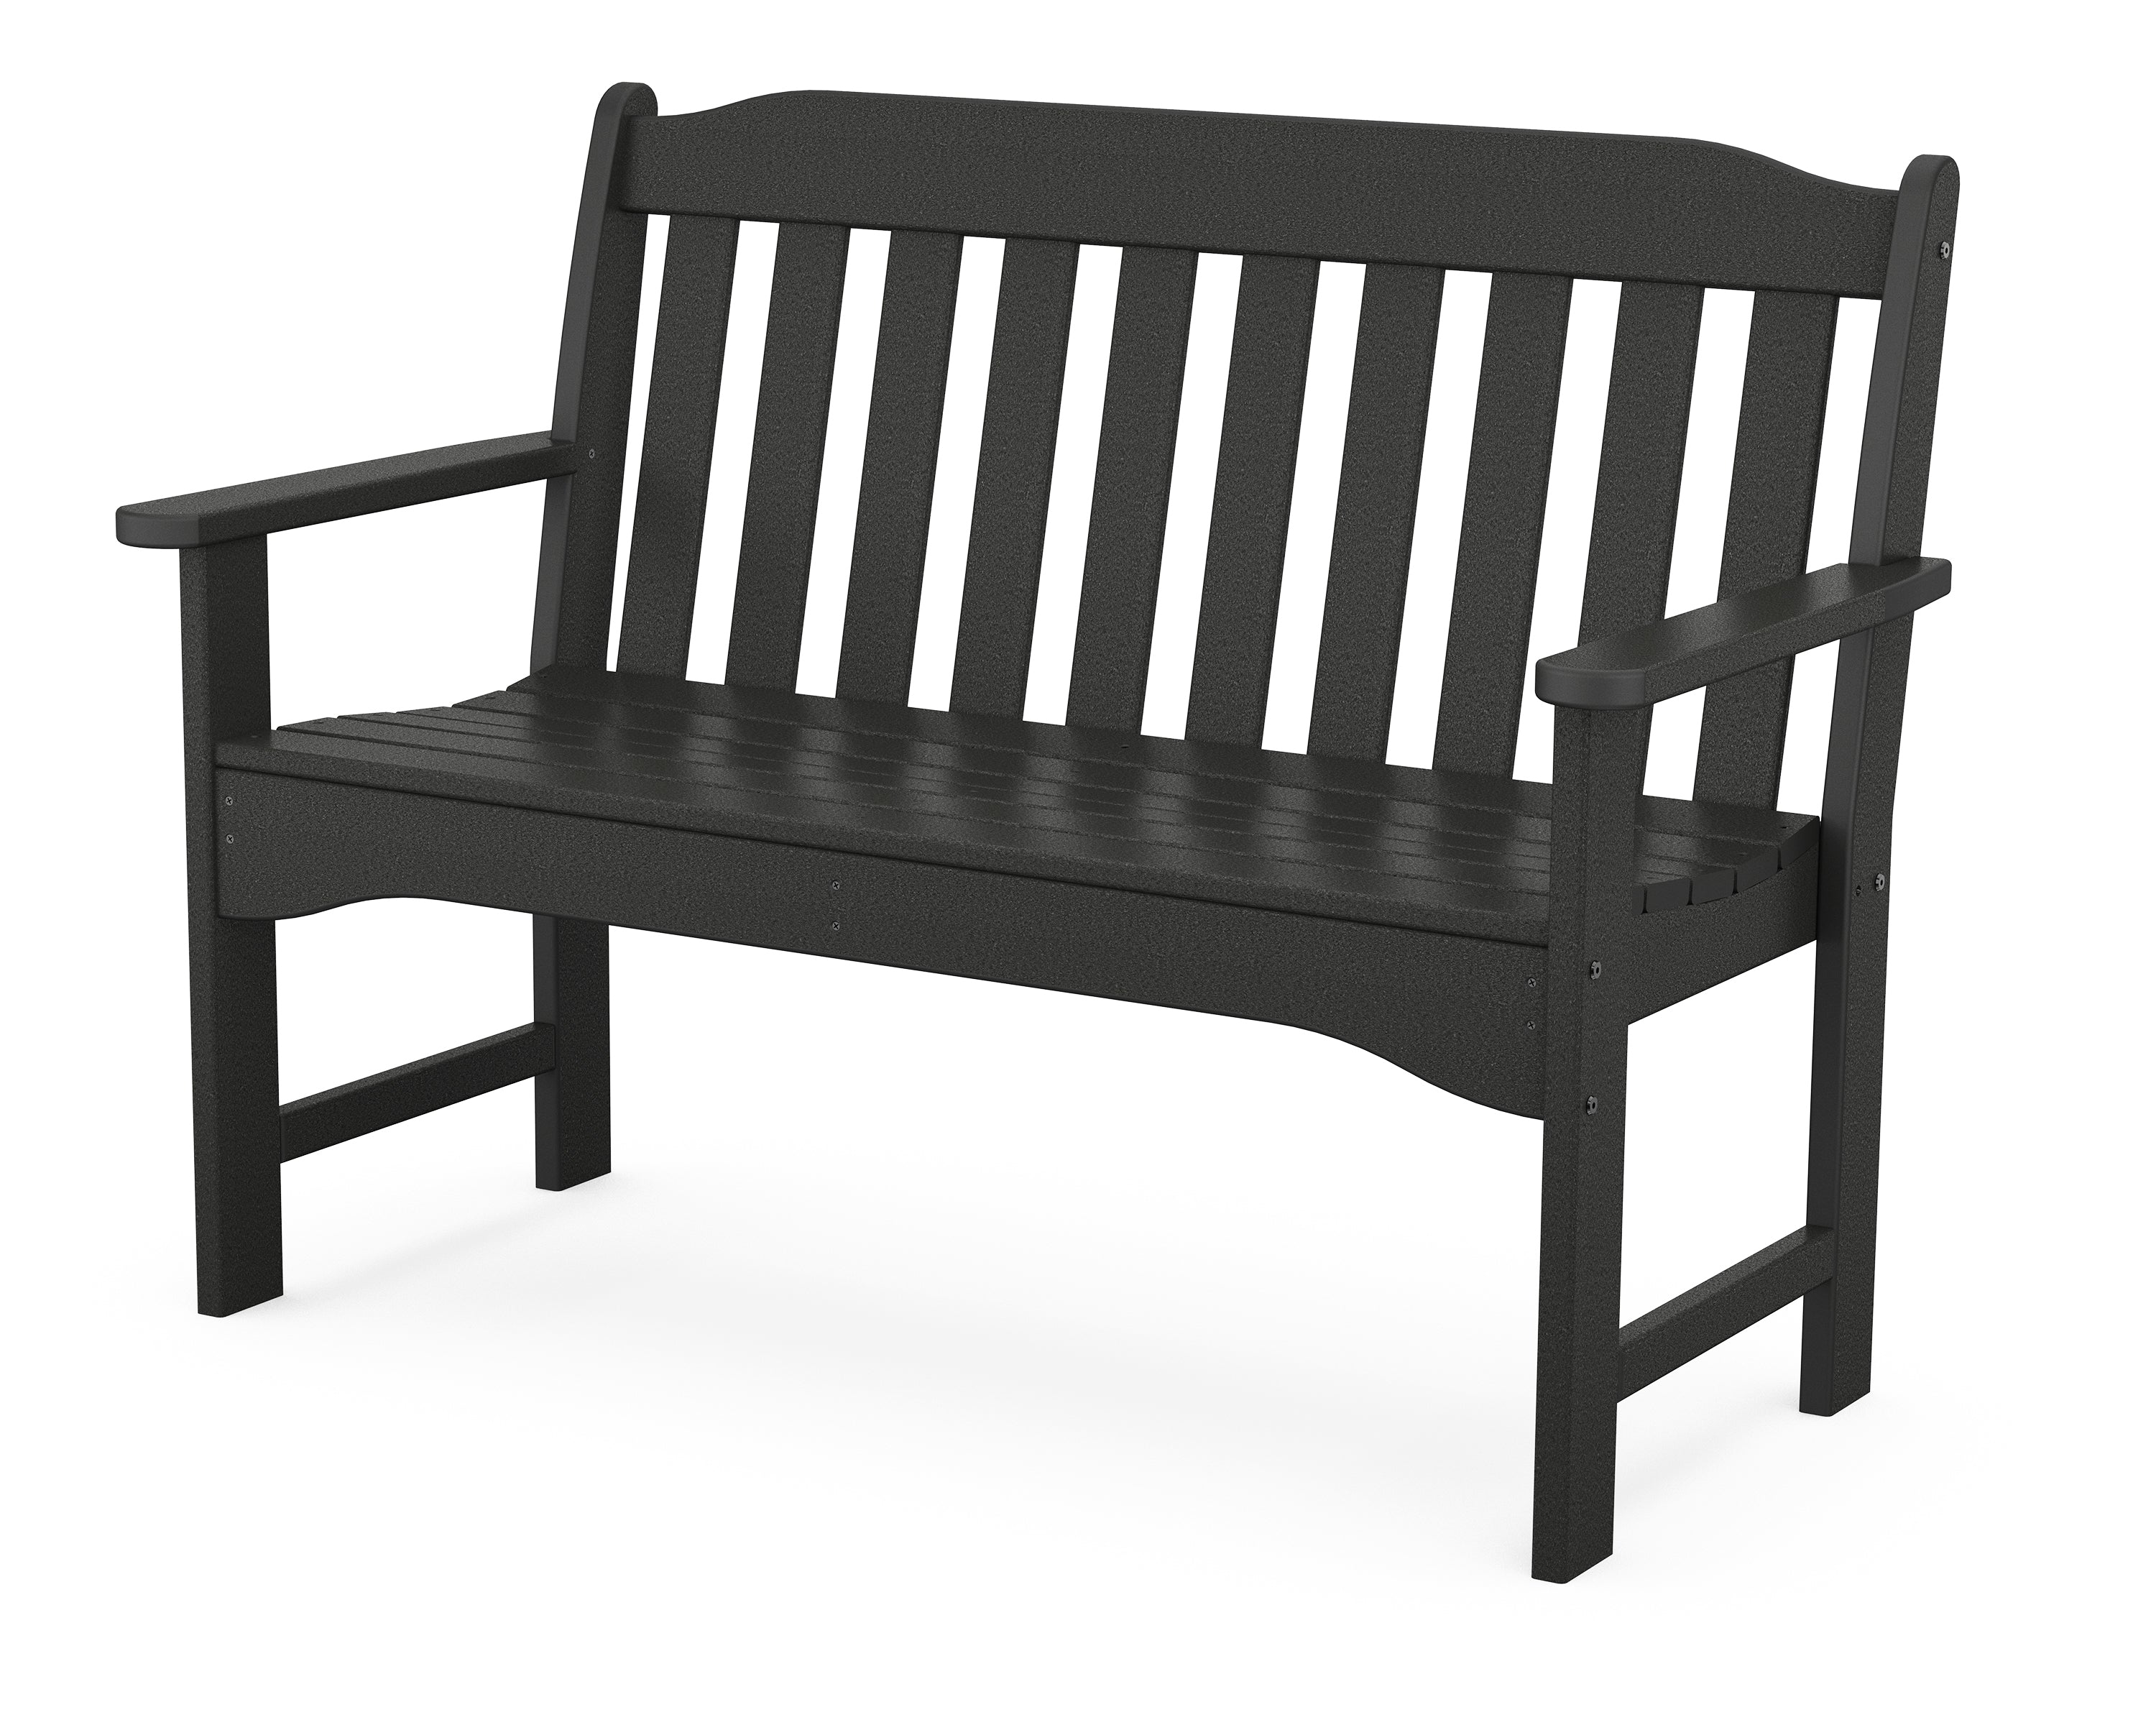 Country Living Country Living 48" Garden Bench in Black